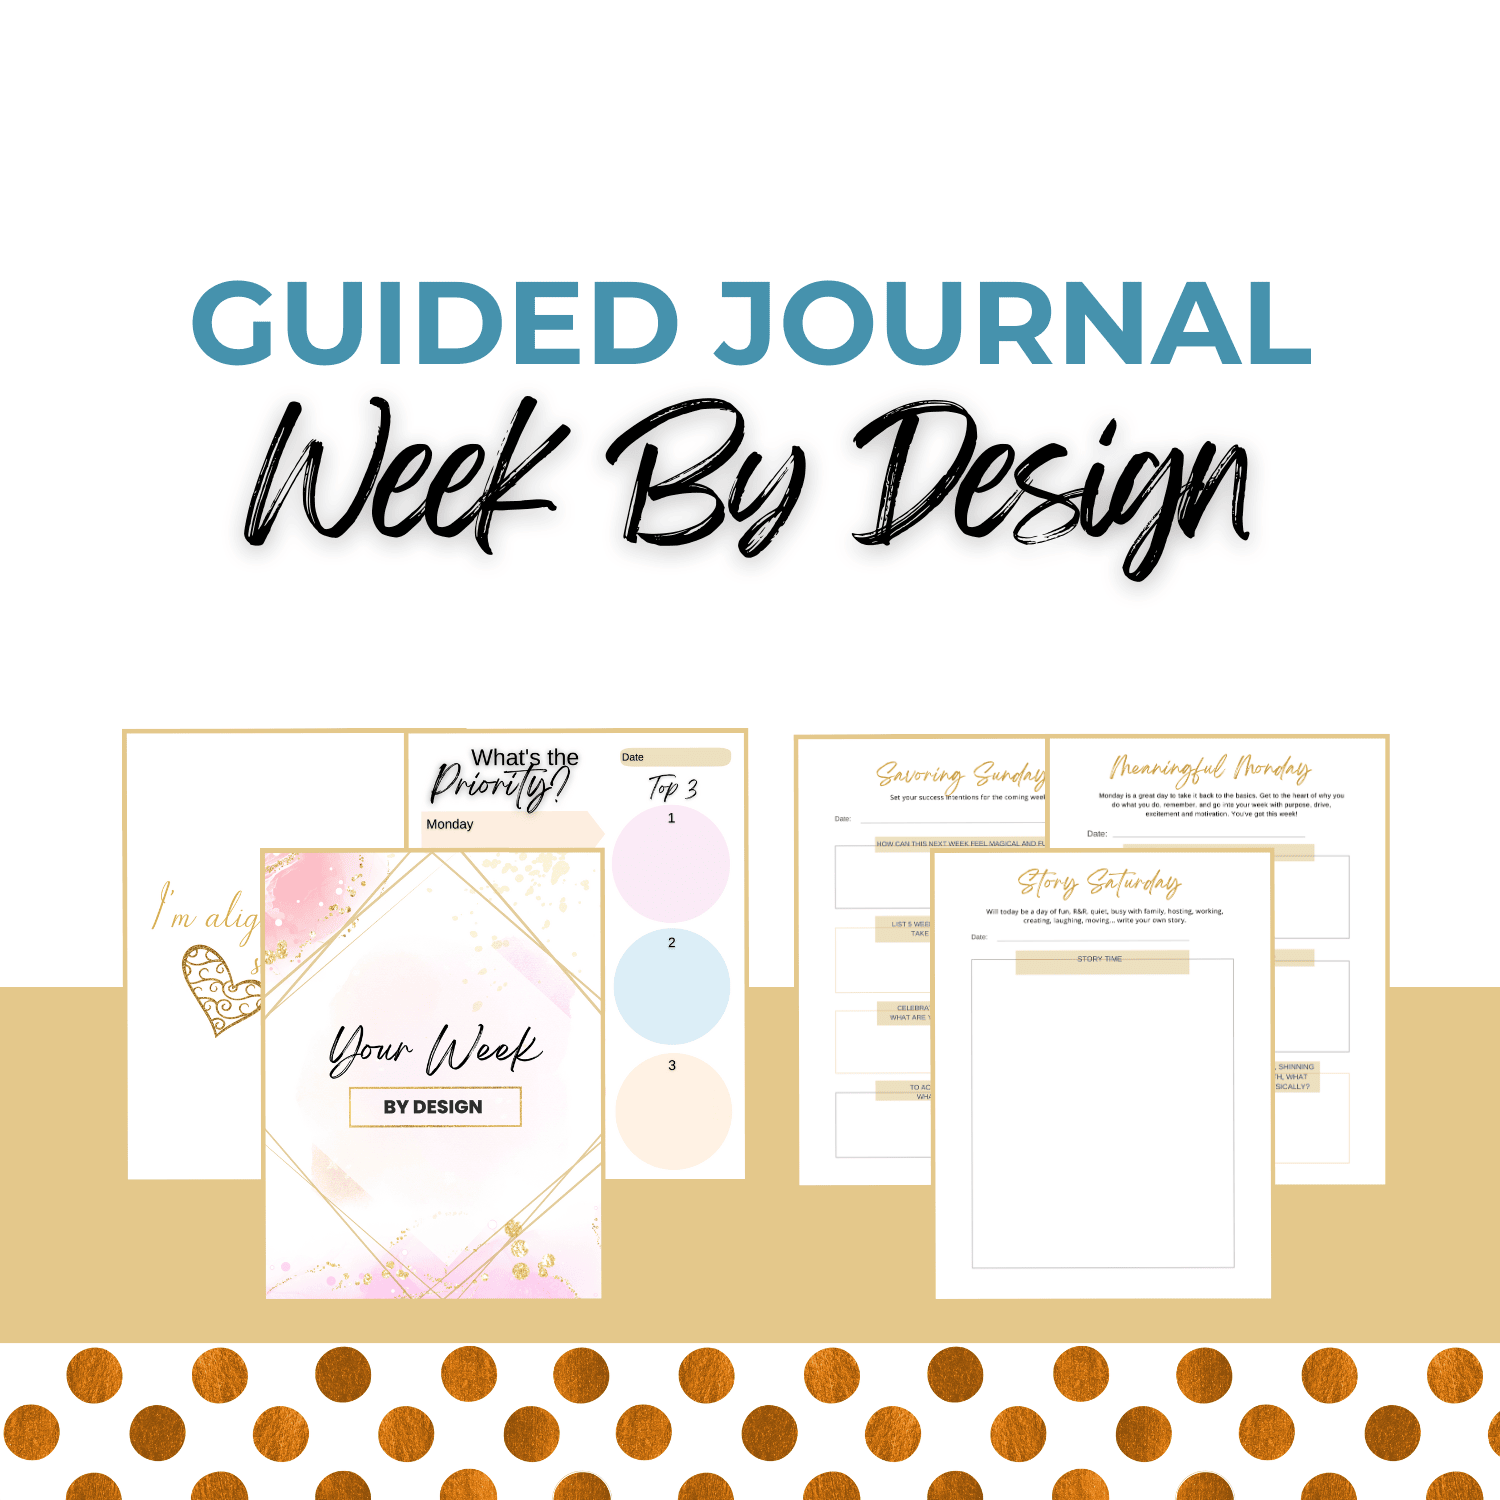 A graphic for Guided Journal Week By Design showing various pages from the journal